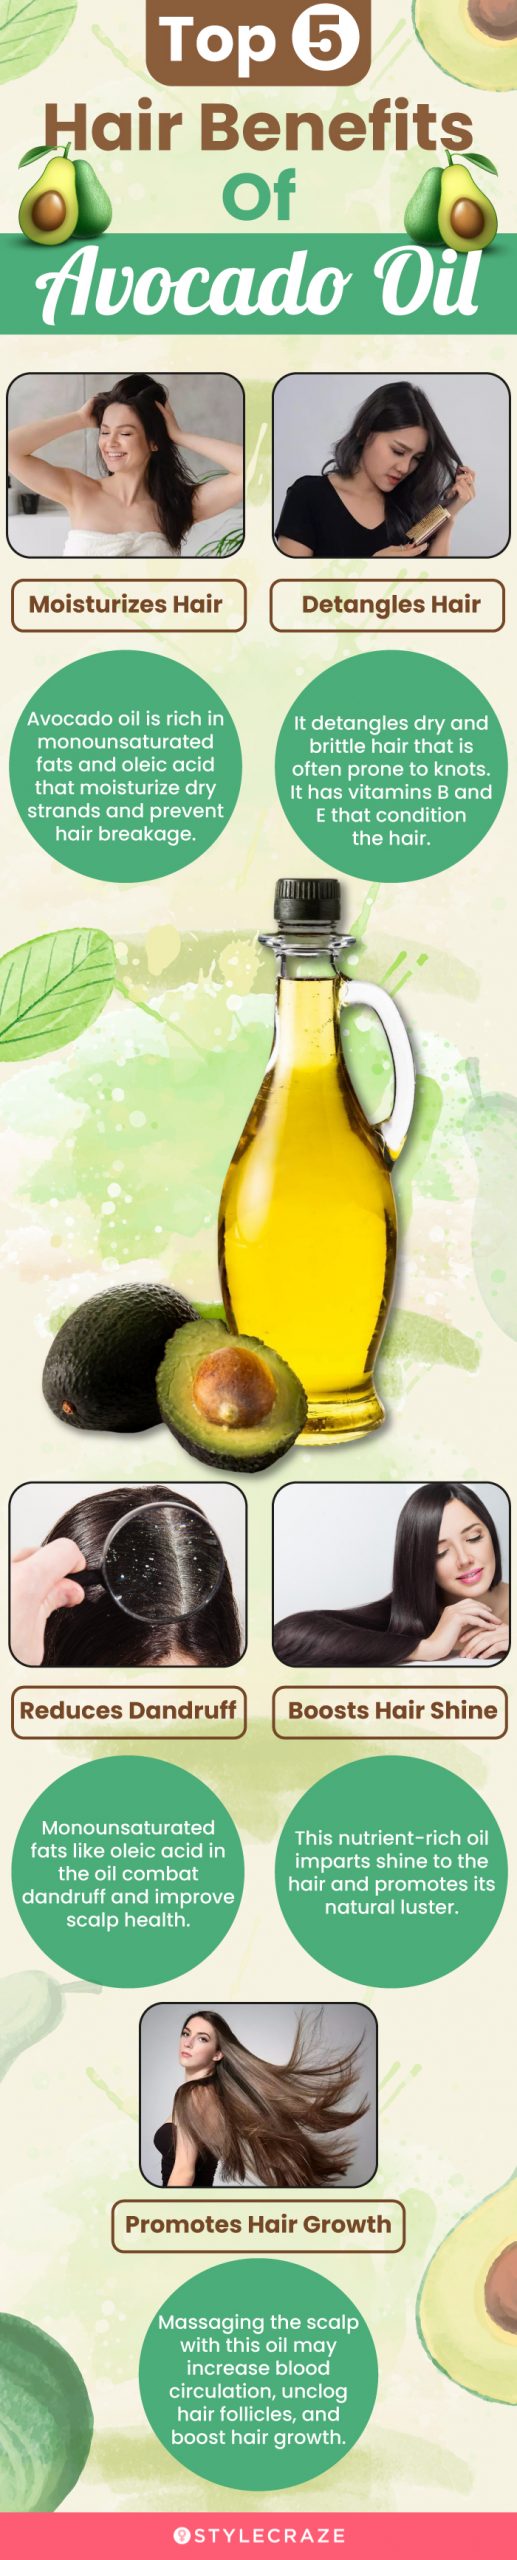 top 5 hair benefits of avocado oil (infographic)